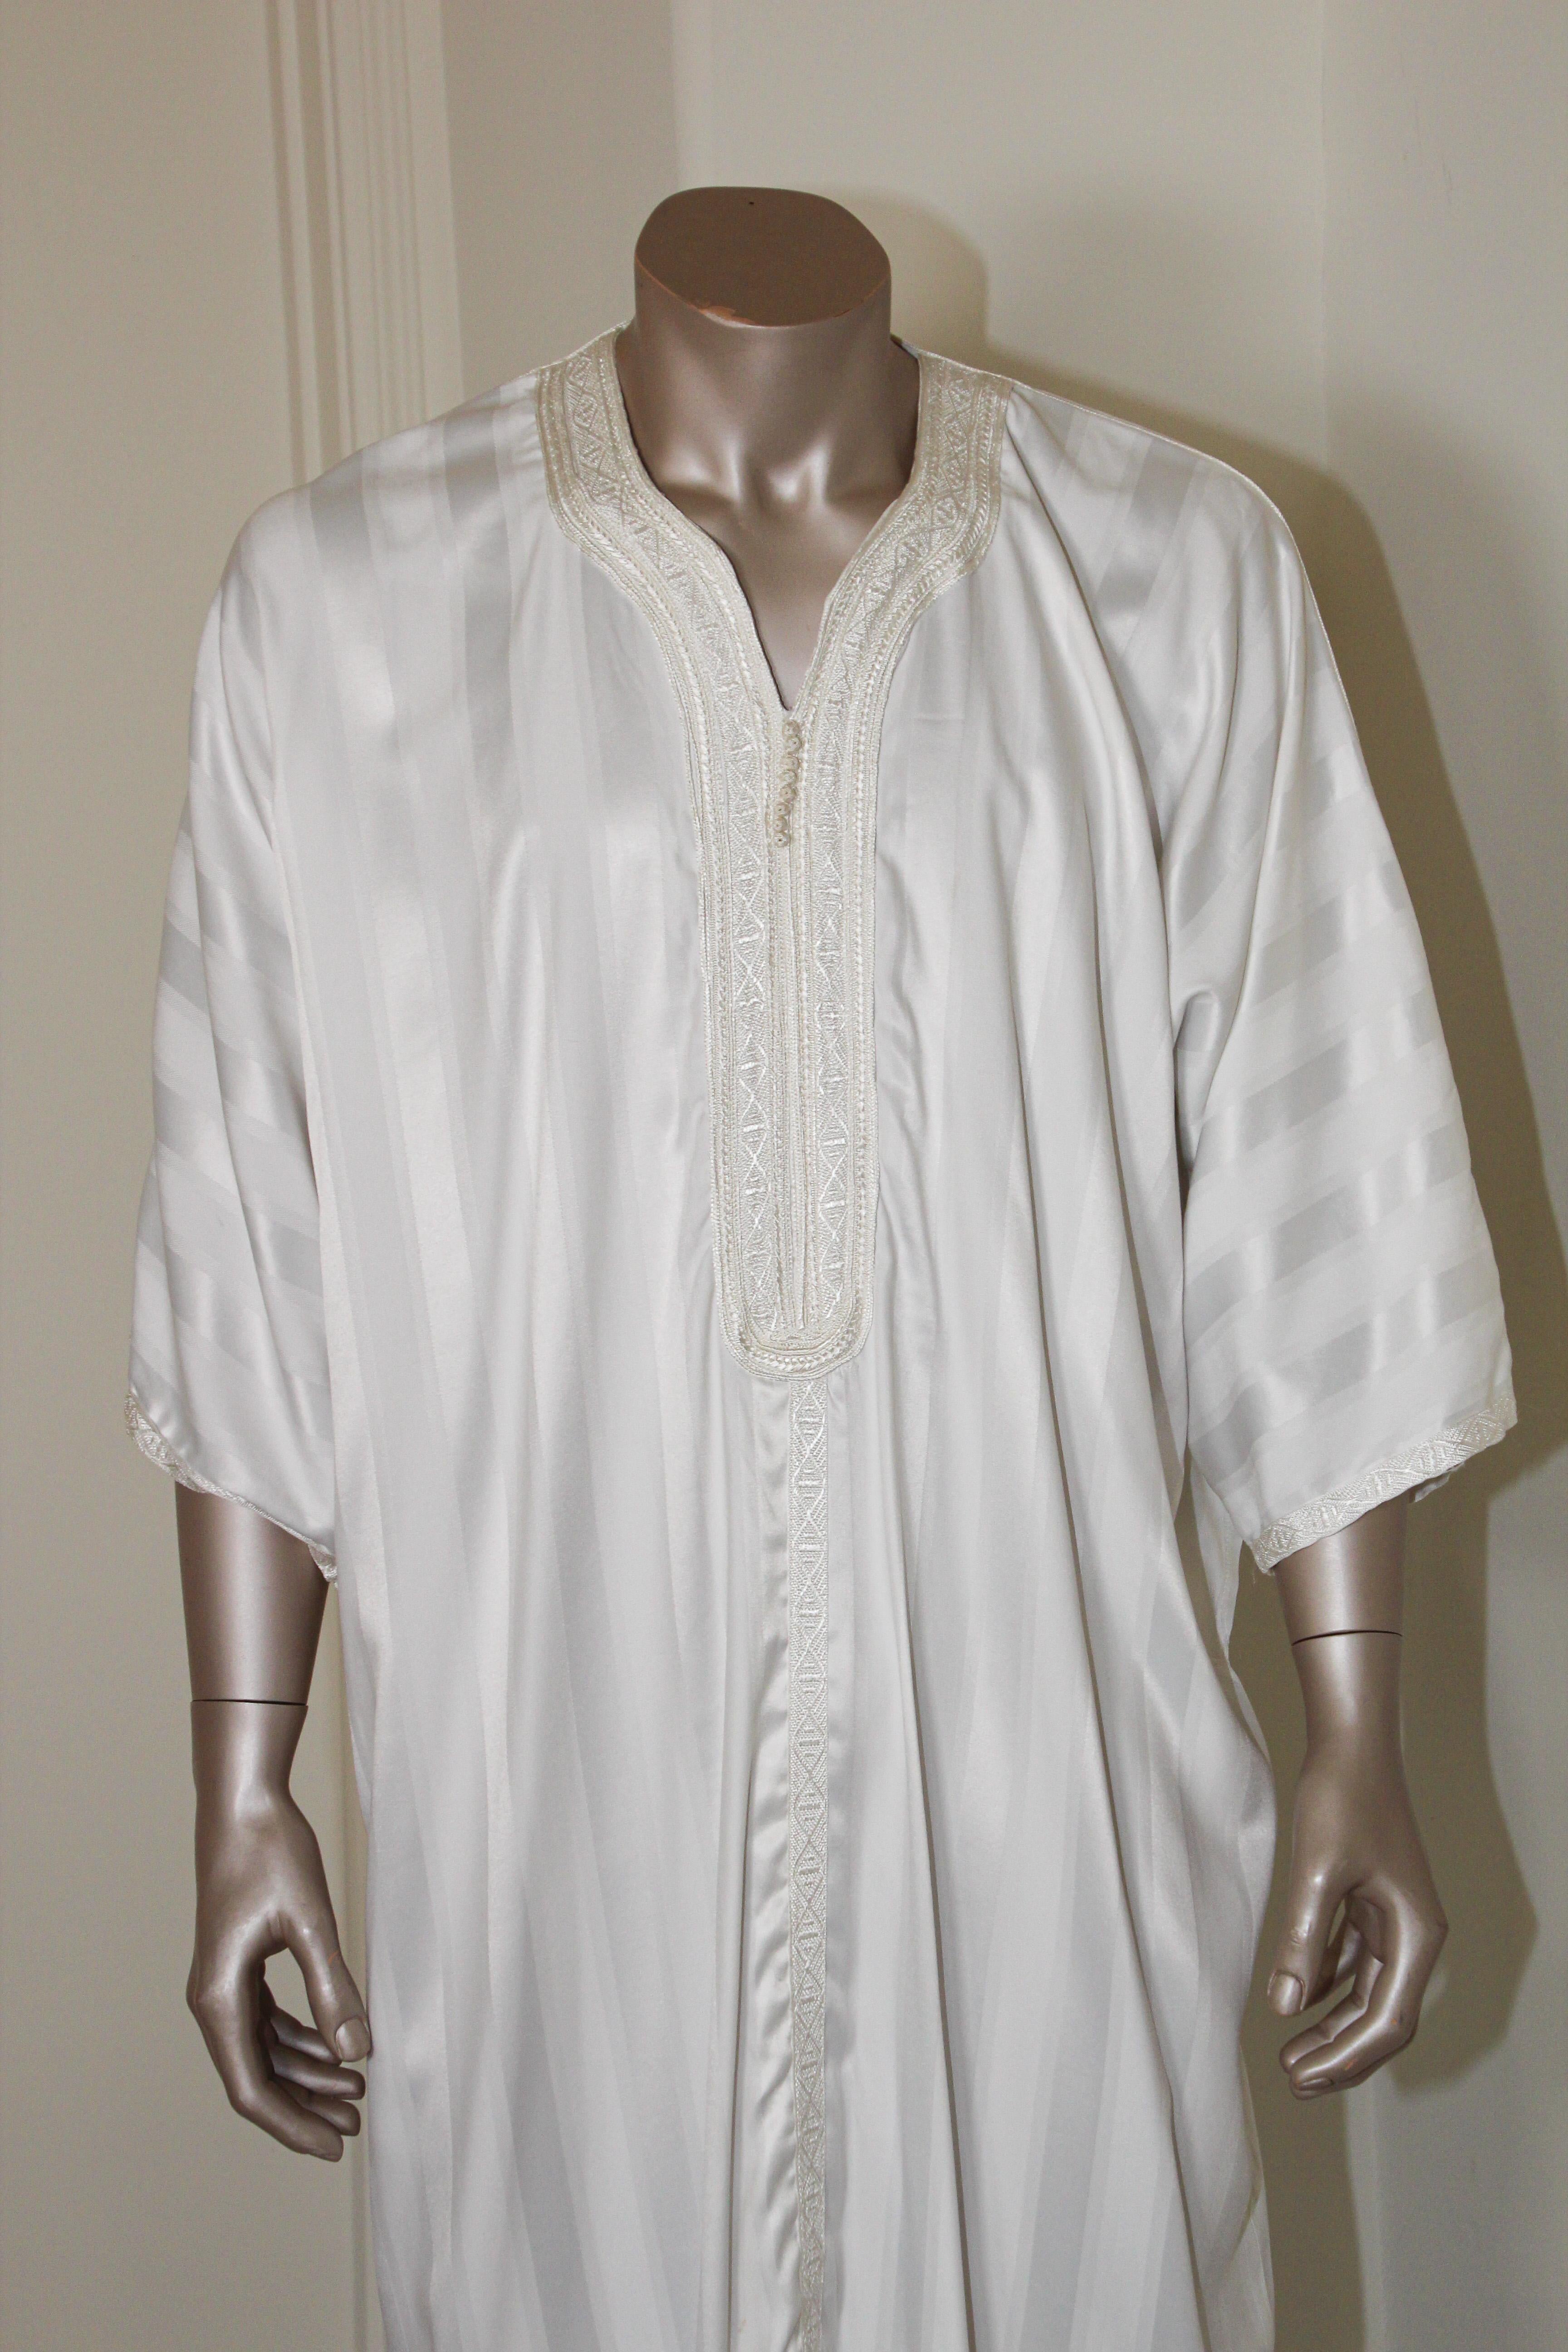 victorian male nightgown